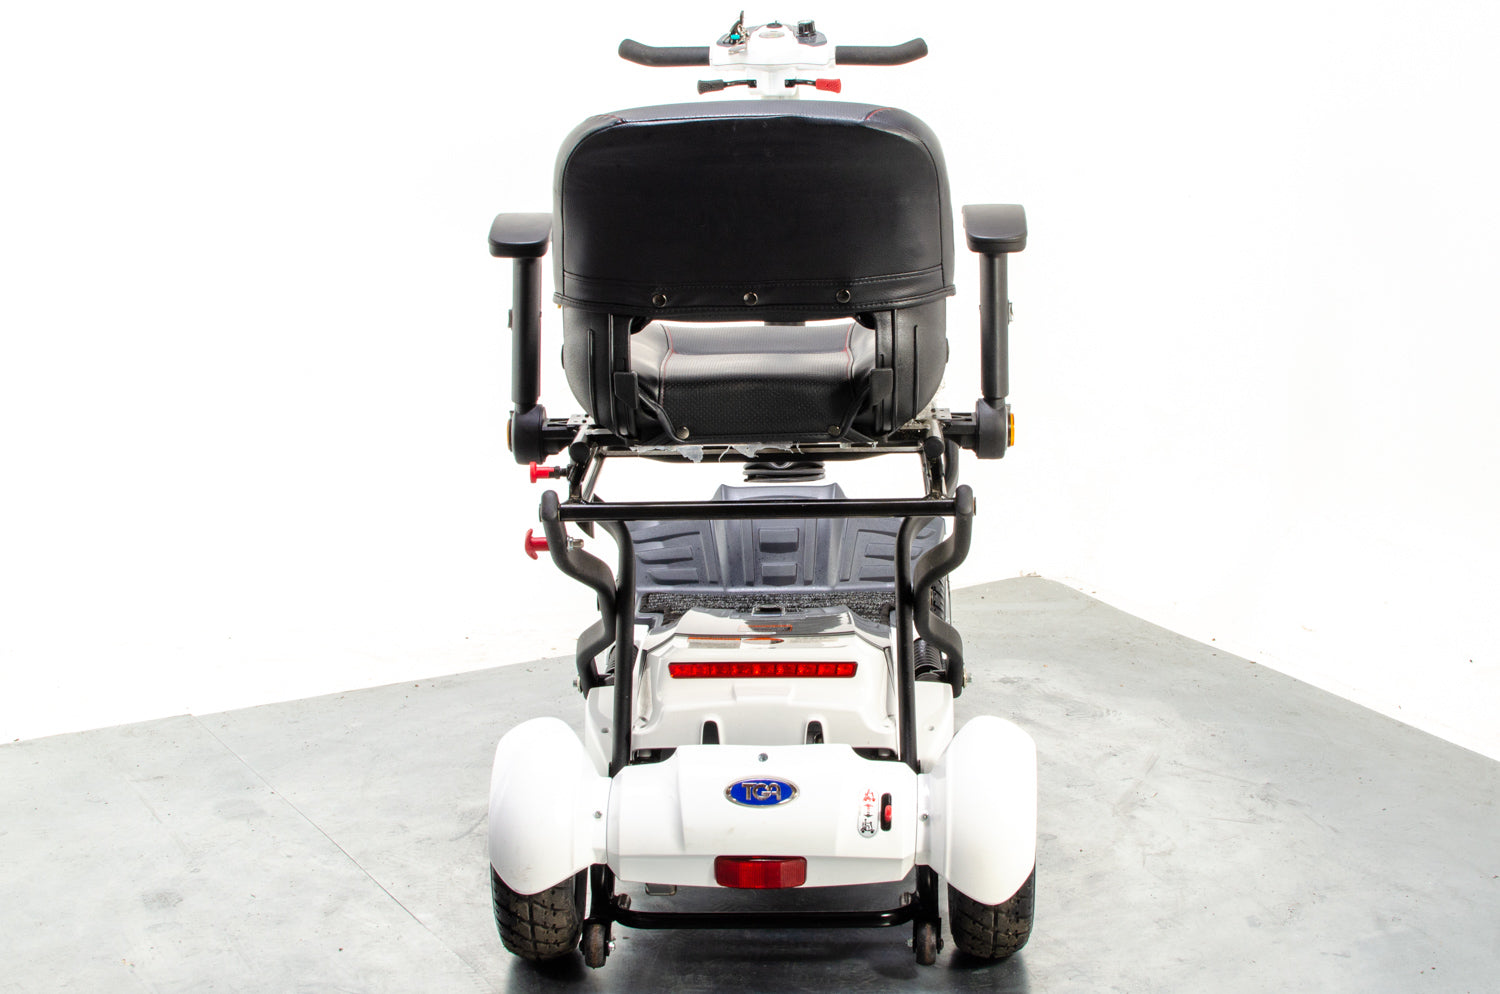 TGA Maximo Used Mobility Scooter 4mph Folding Lithium Pneumatic Suspension White 13307